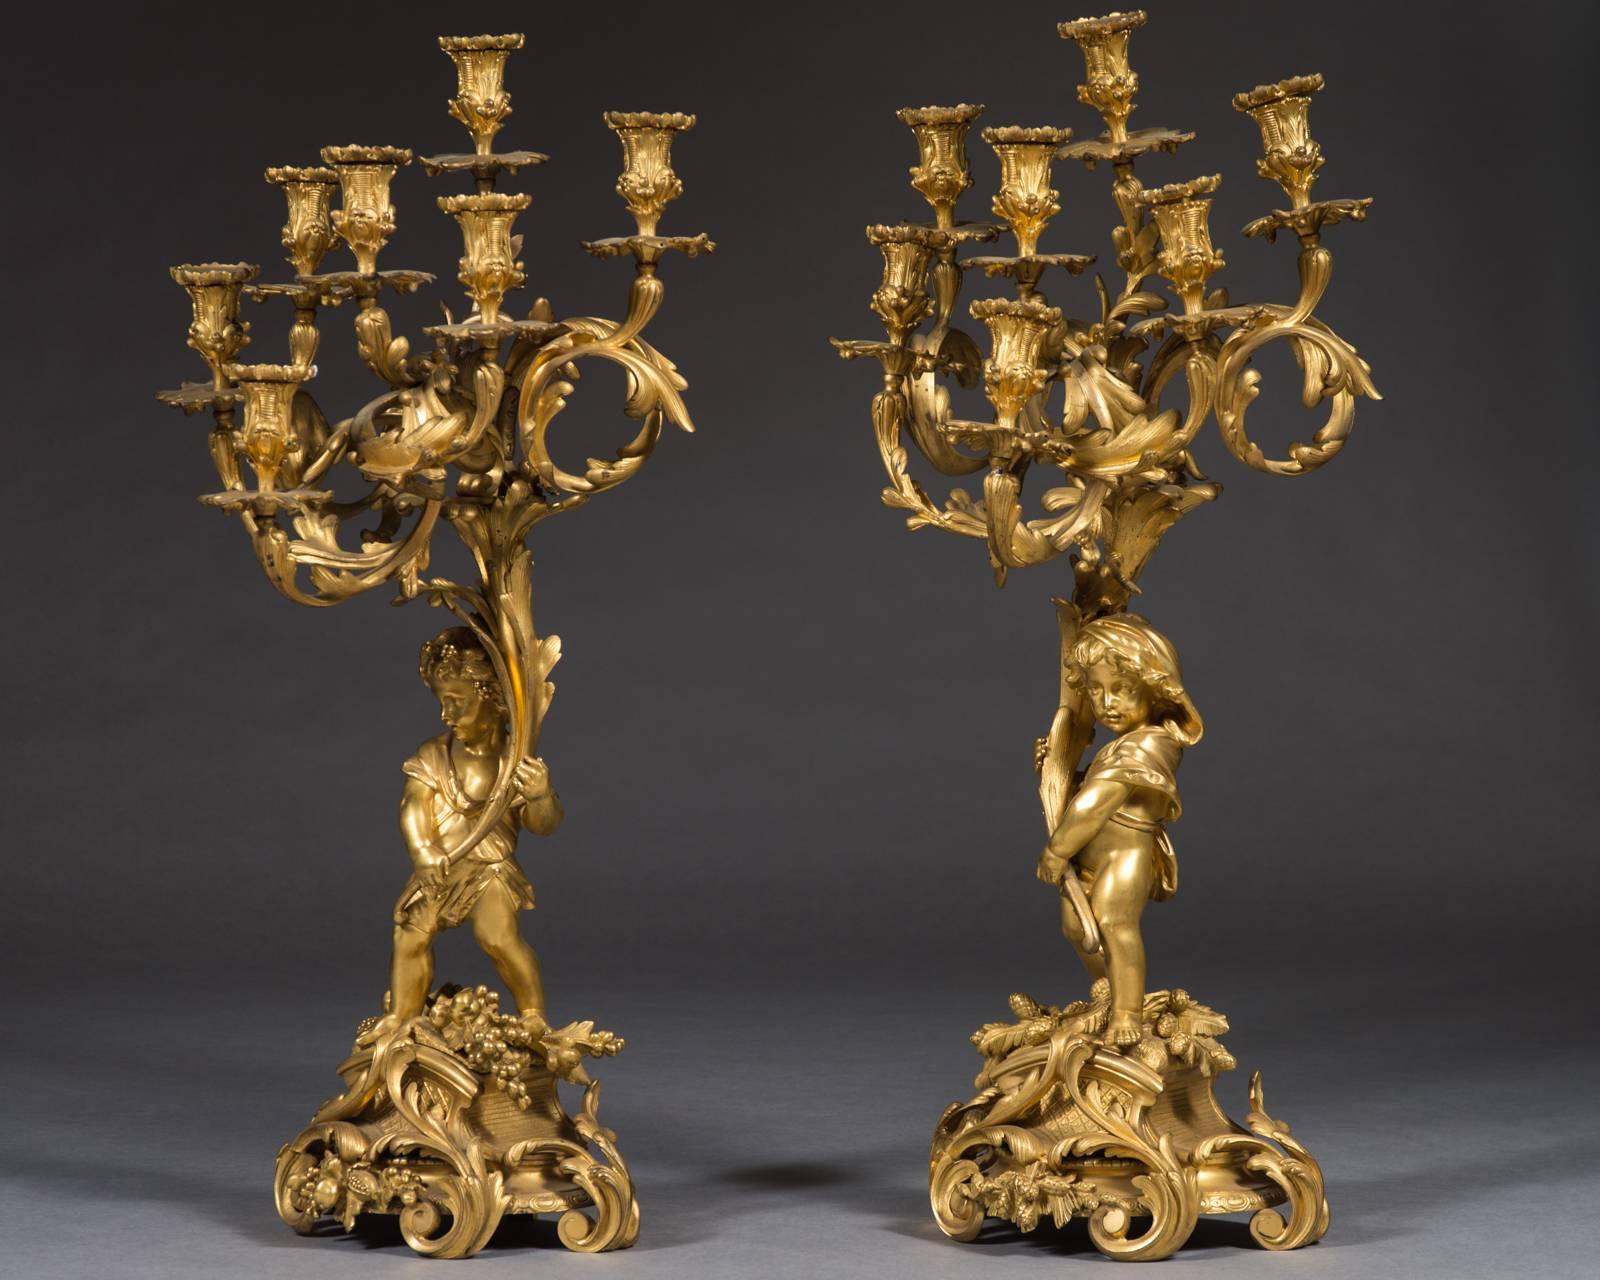 Very Fine Pair of 19th Century French Gilt Bronze Candelabras by Victor Raulin For Sale 2